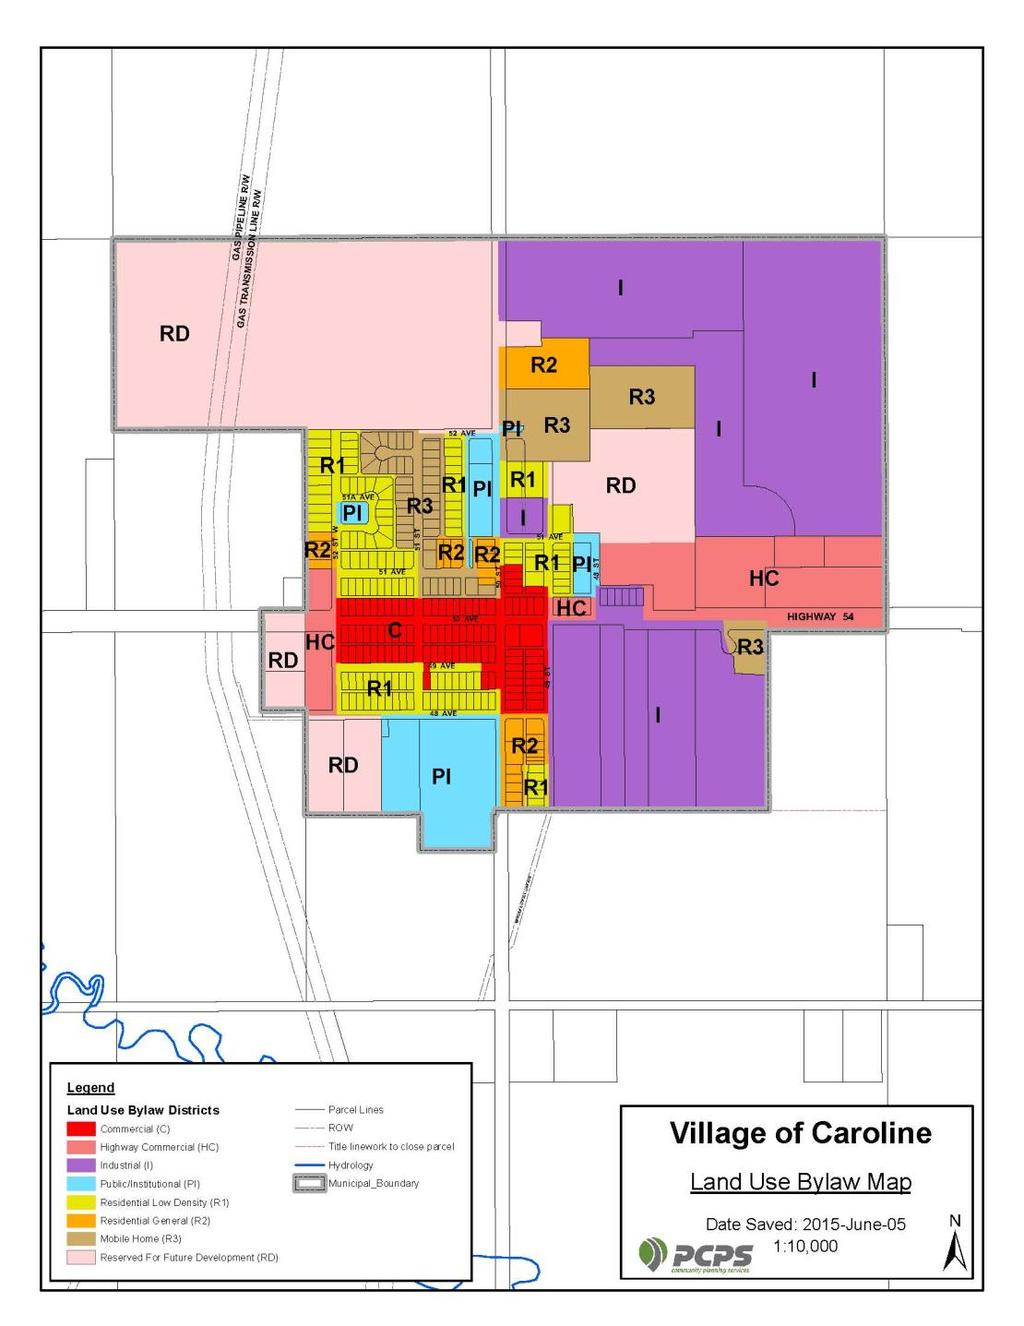 CAROLINE LAND USE BYLAW The Village s Land Use Bylaw (LUB) provides detailed regulations for use of various properties and development of various types of land uses.